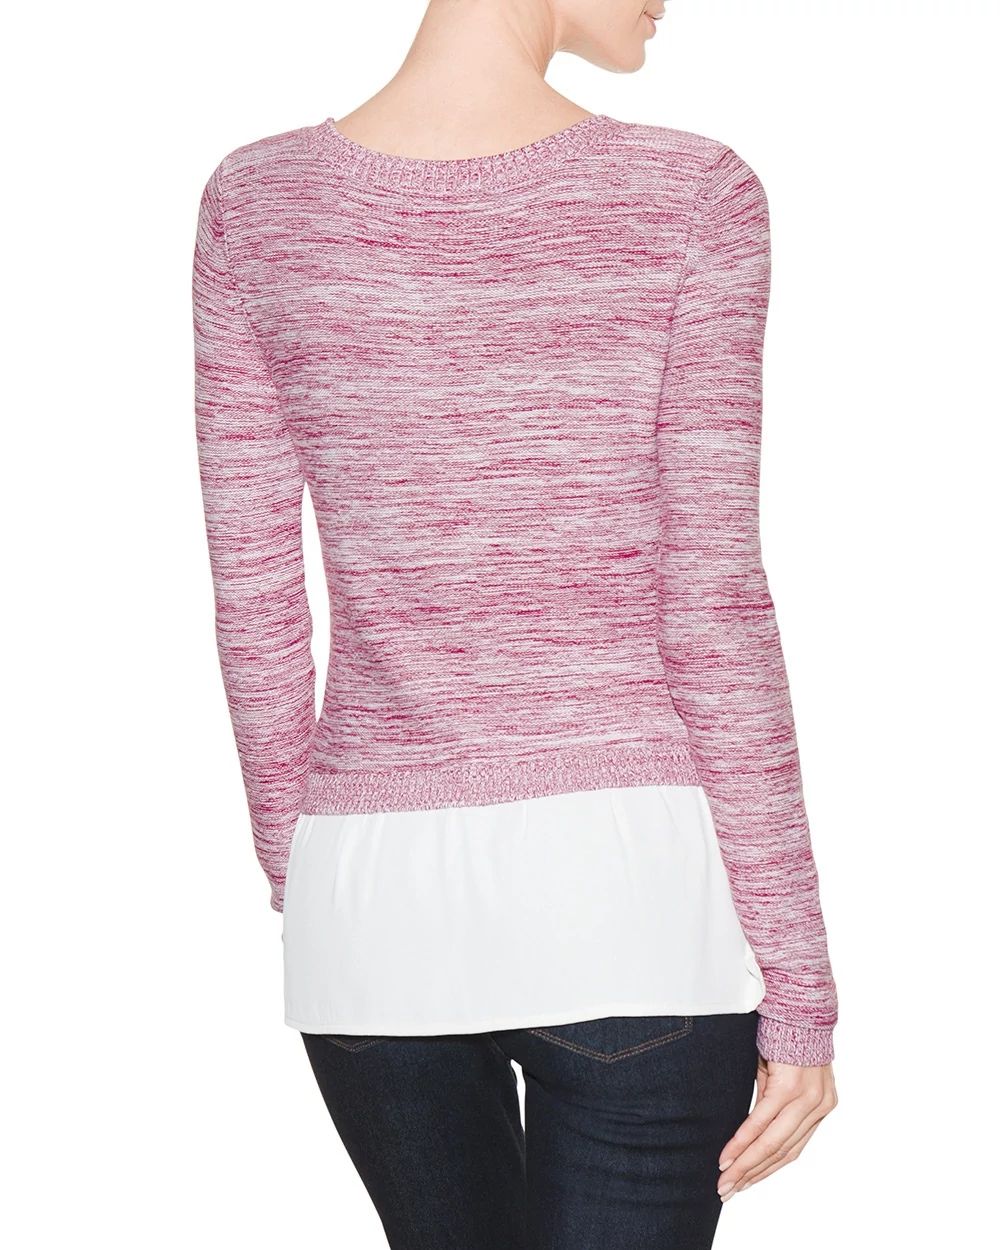 Outlet WHBM Woven-Hem Pullover Sweater click to view larger image.